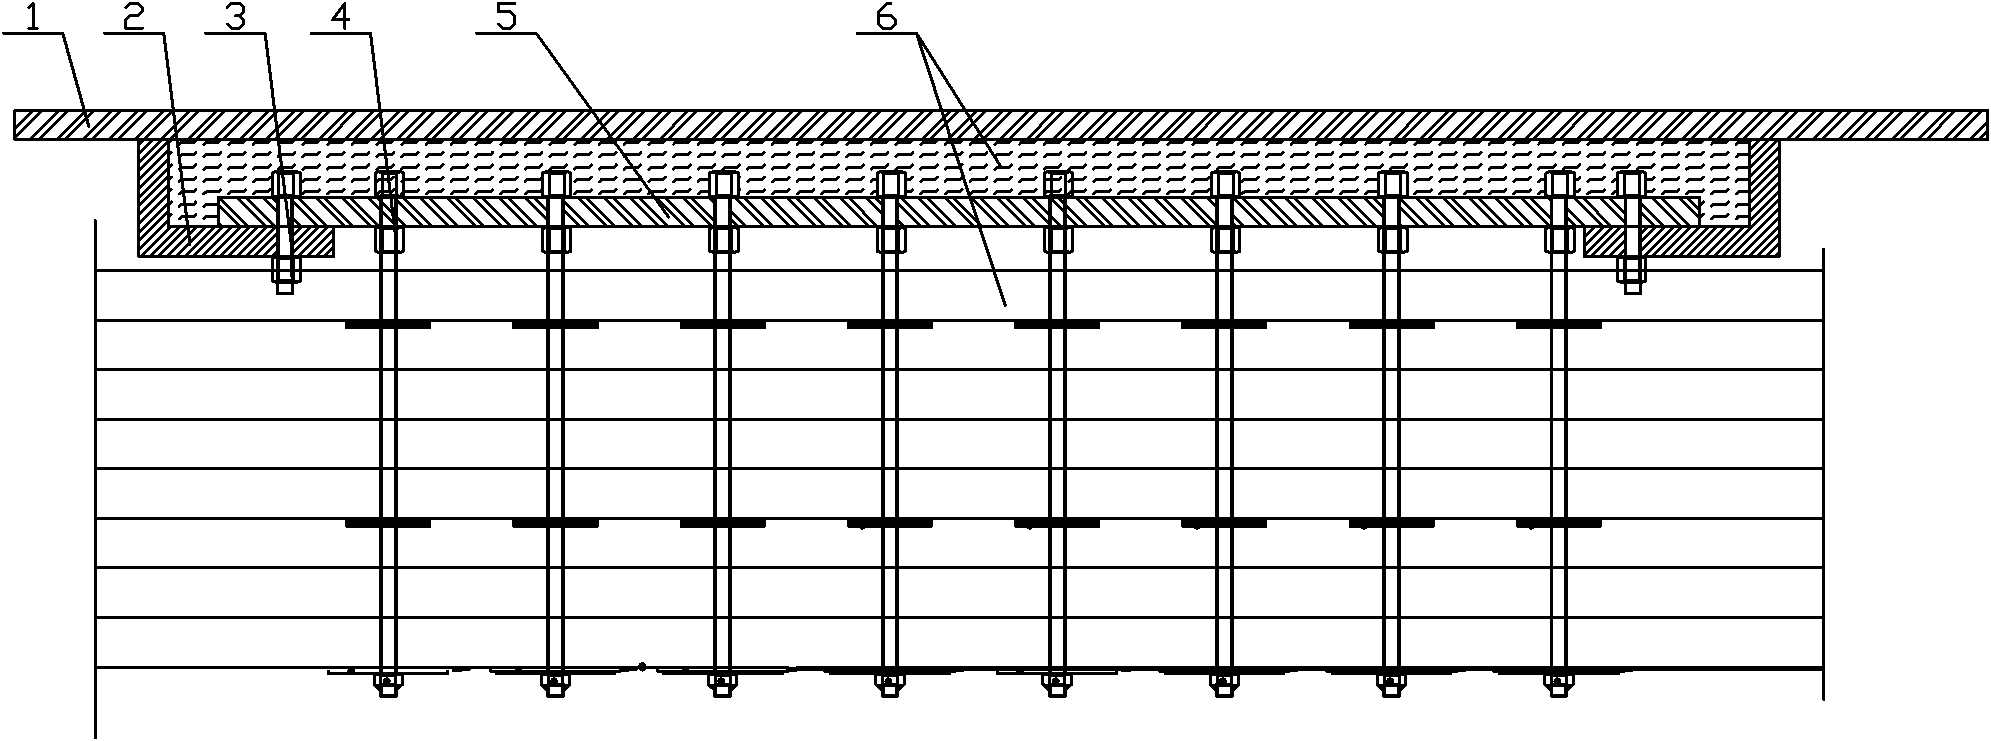 Energy efficient fixture method for anchor nail